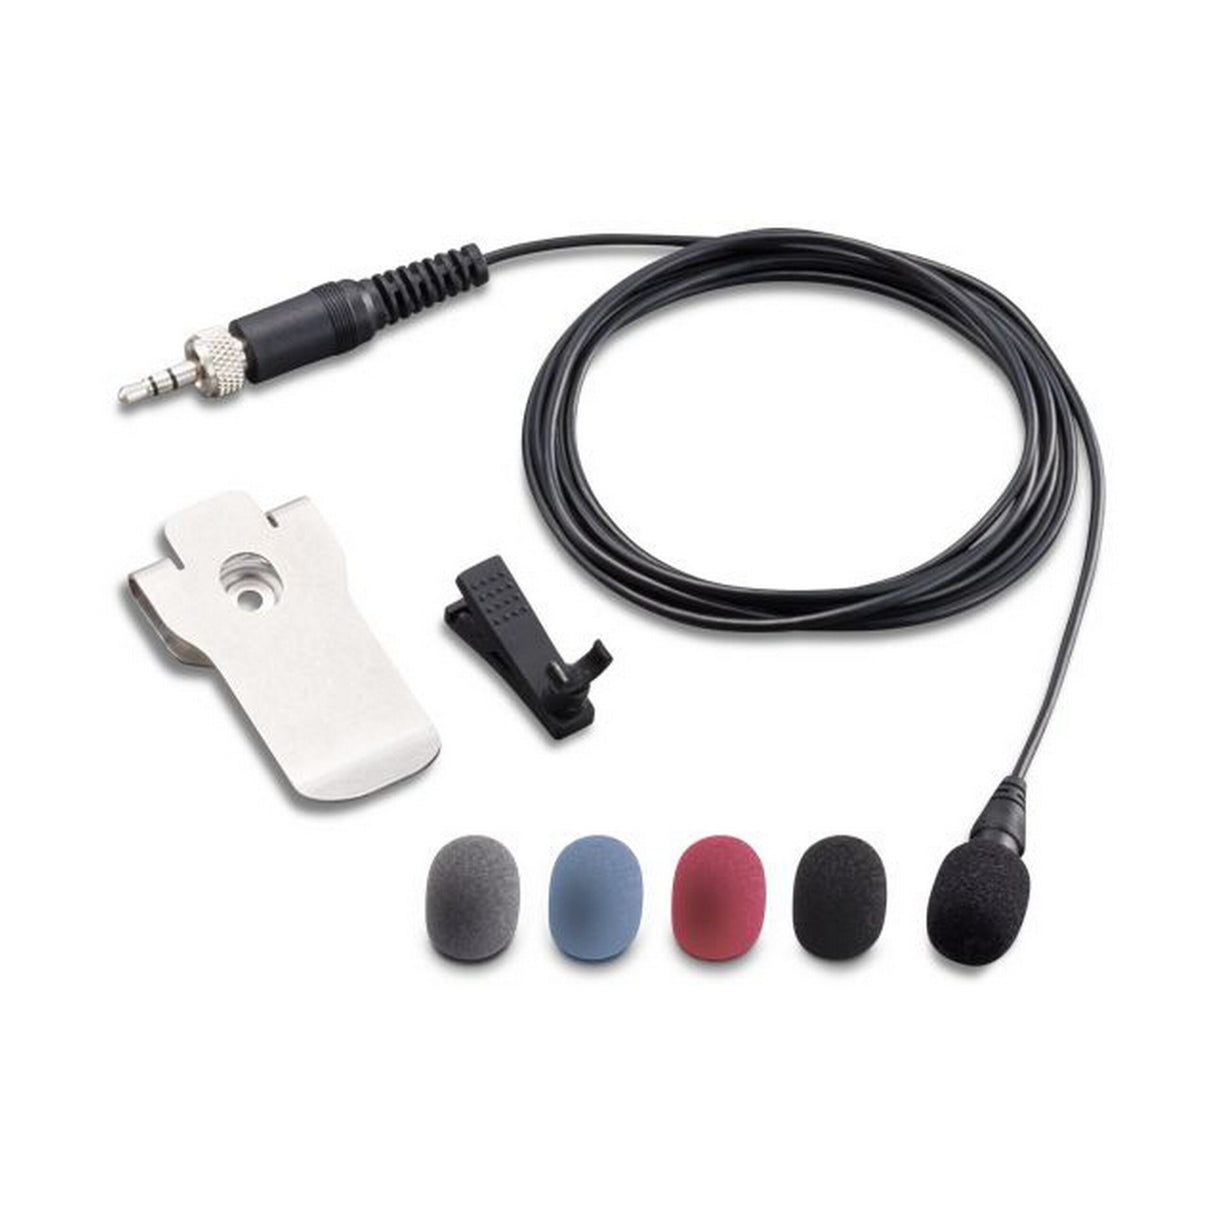 Zoom APF-1 Lavalier Microphone Pack with LMF-2 Lavalier Microphone